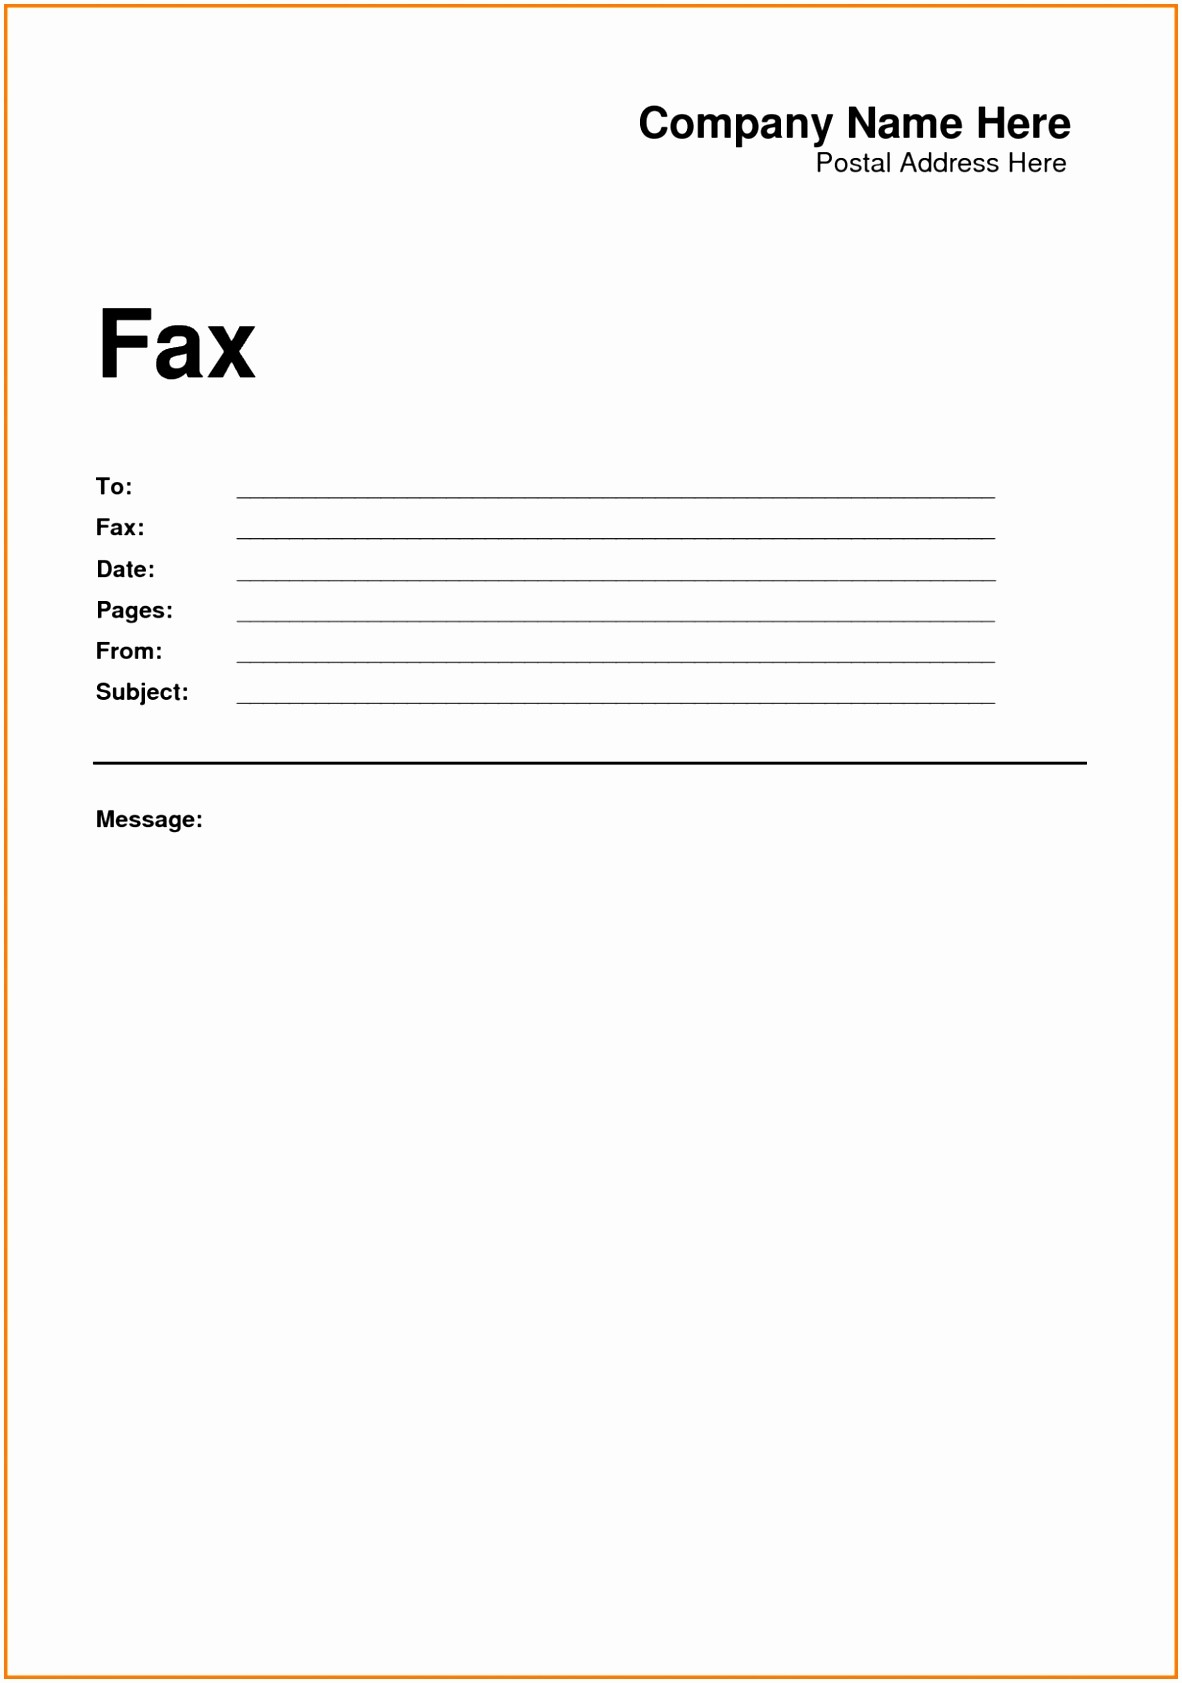 Free Fax Templates for Word New Good Covering Letter Example Uk Gseokbinder Design Fax